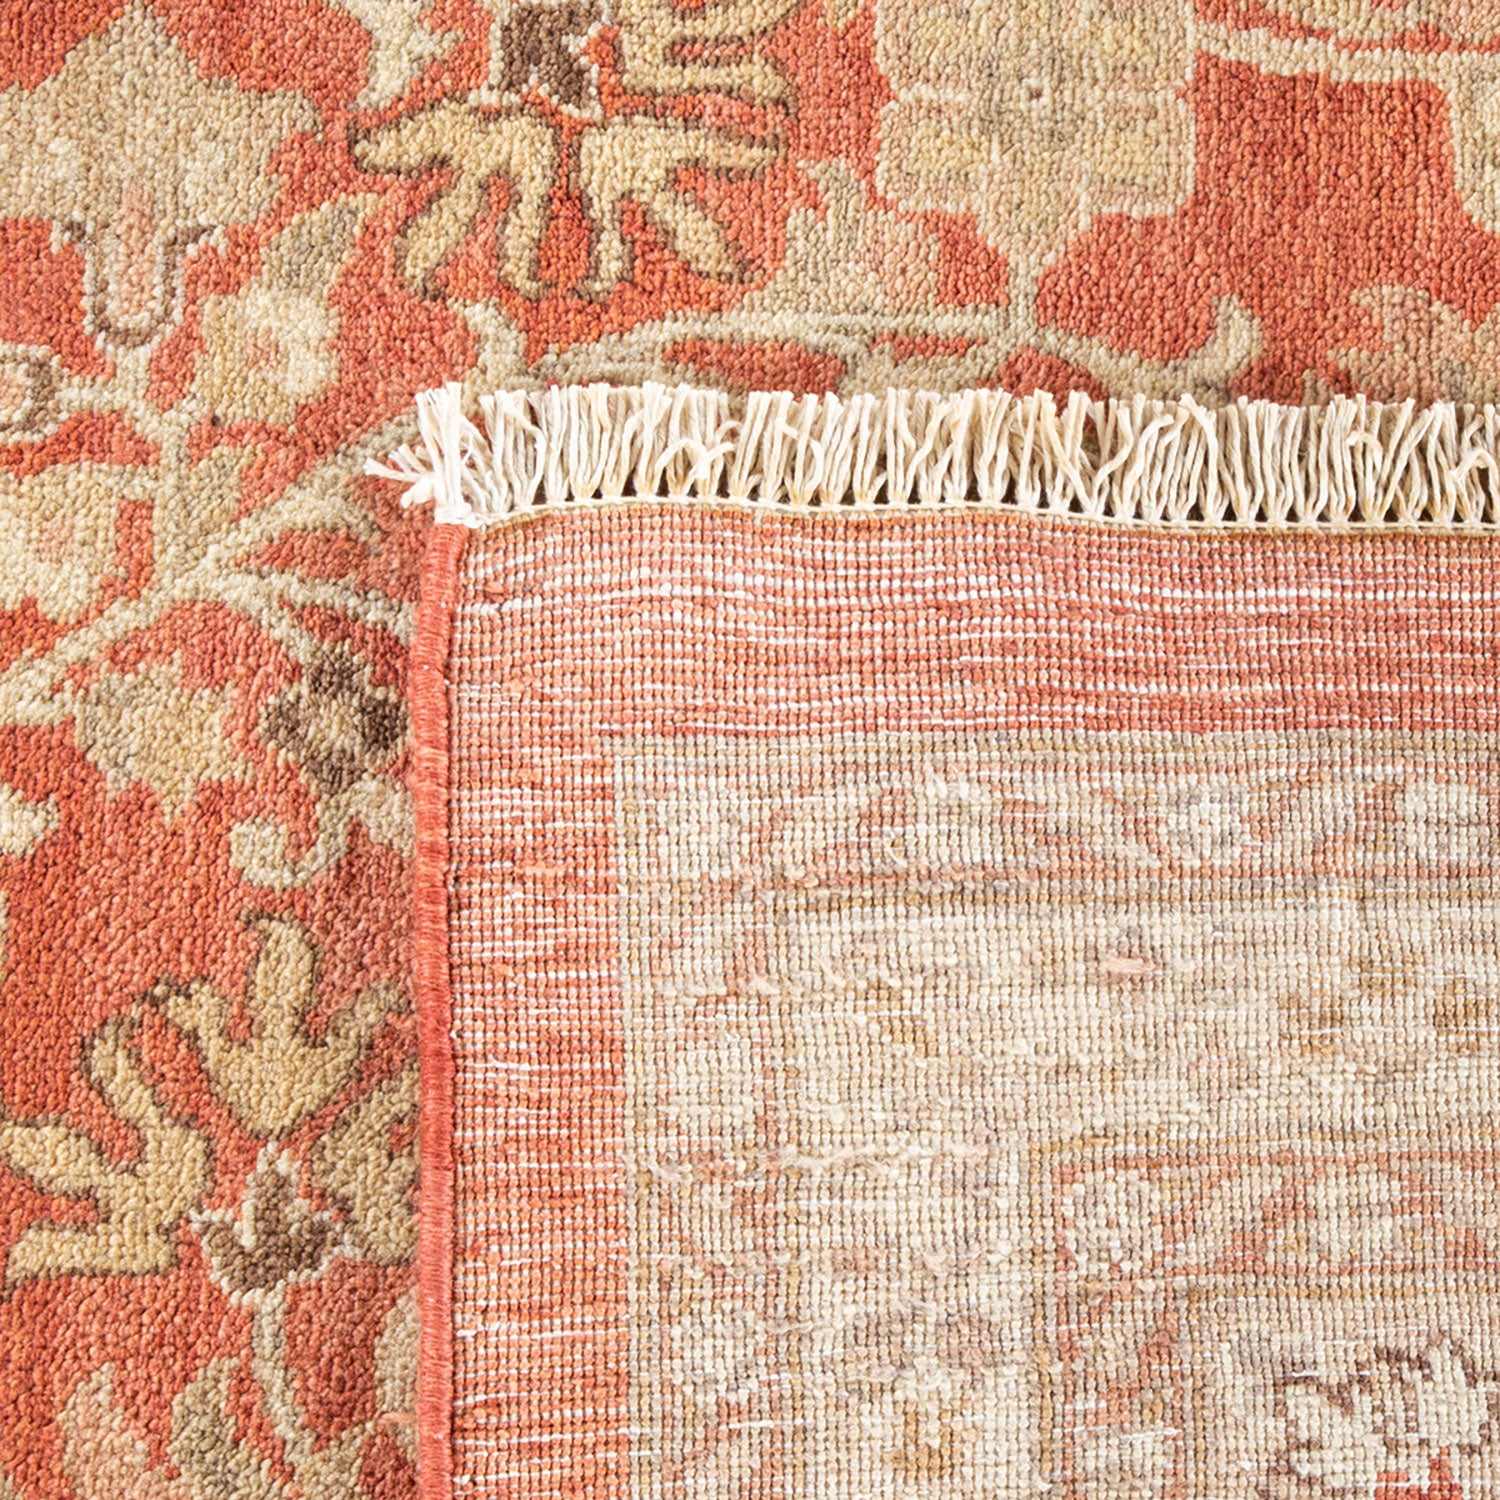 Close-up of an ornate rug showcasing intricate floral patterns and contrasting textures.